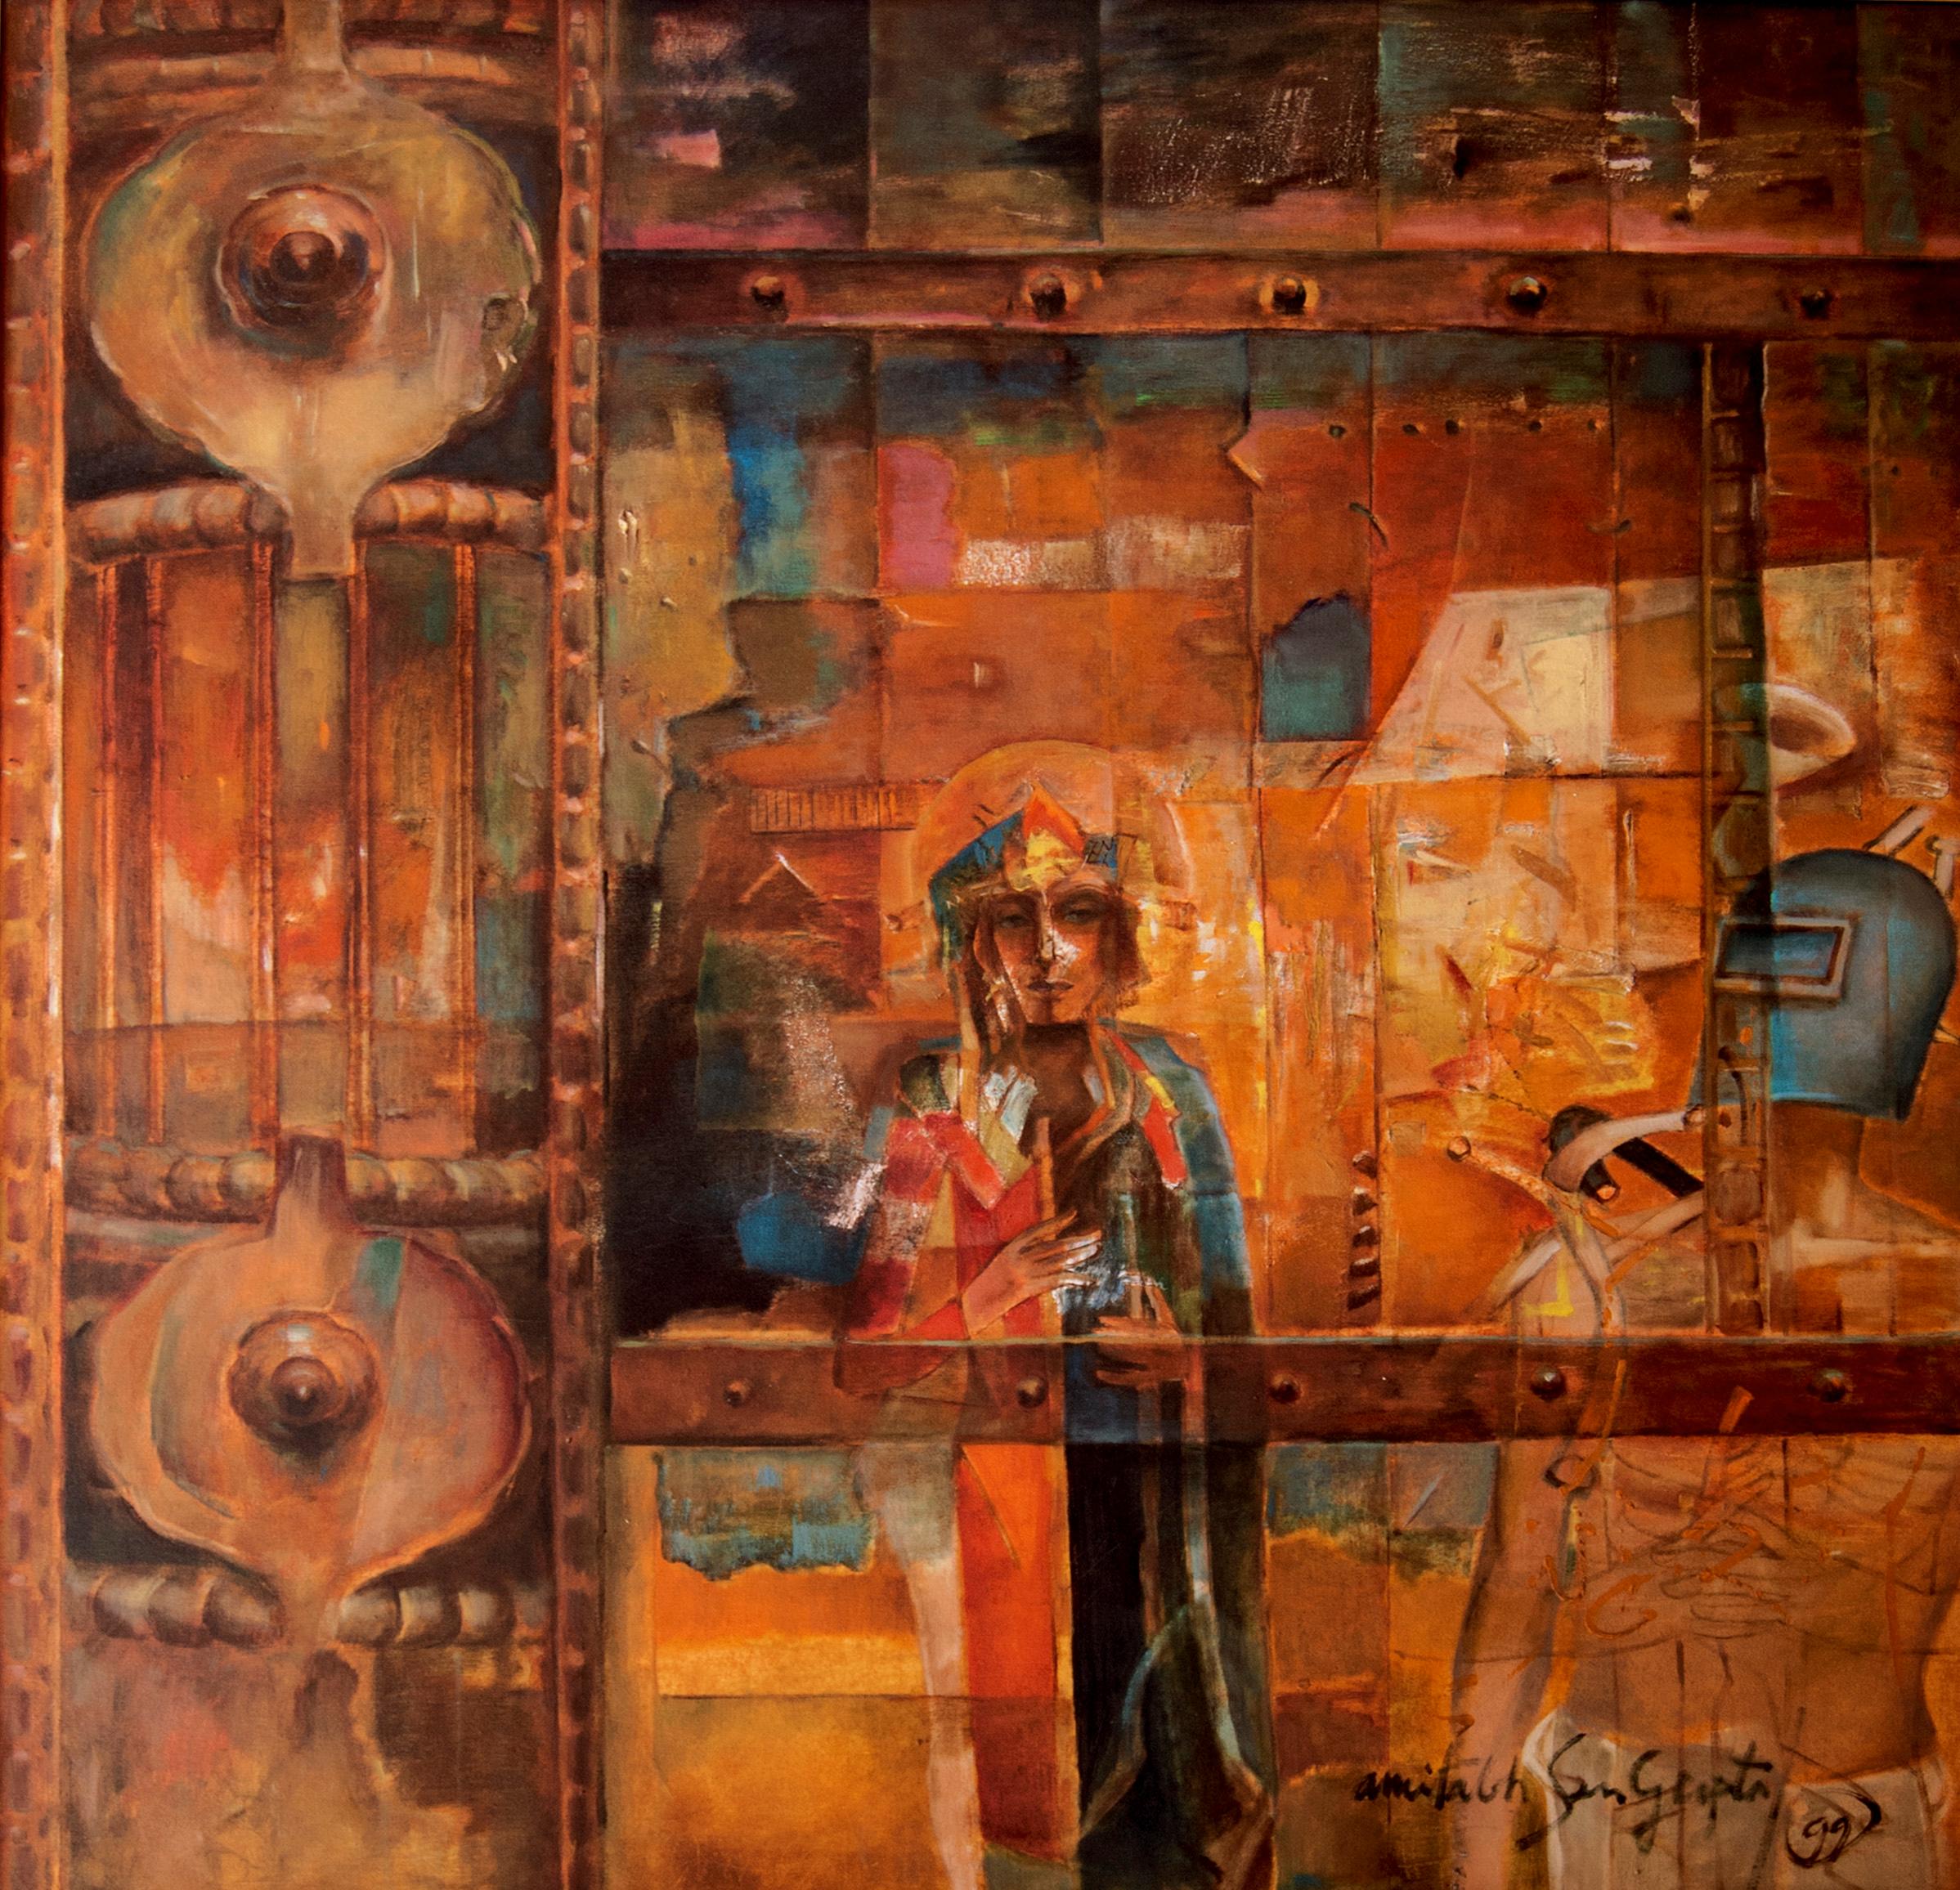 Amitabh Sengupta Abstract Painting - Inconsistent Dialogue, Mythscape Series, Abstract Art, Oil Painting "In Stock"